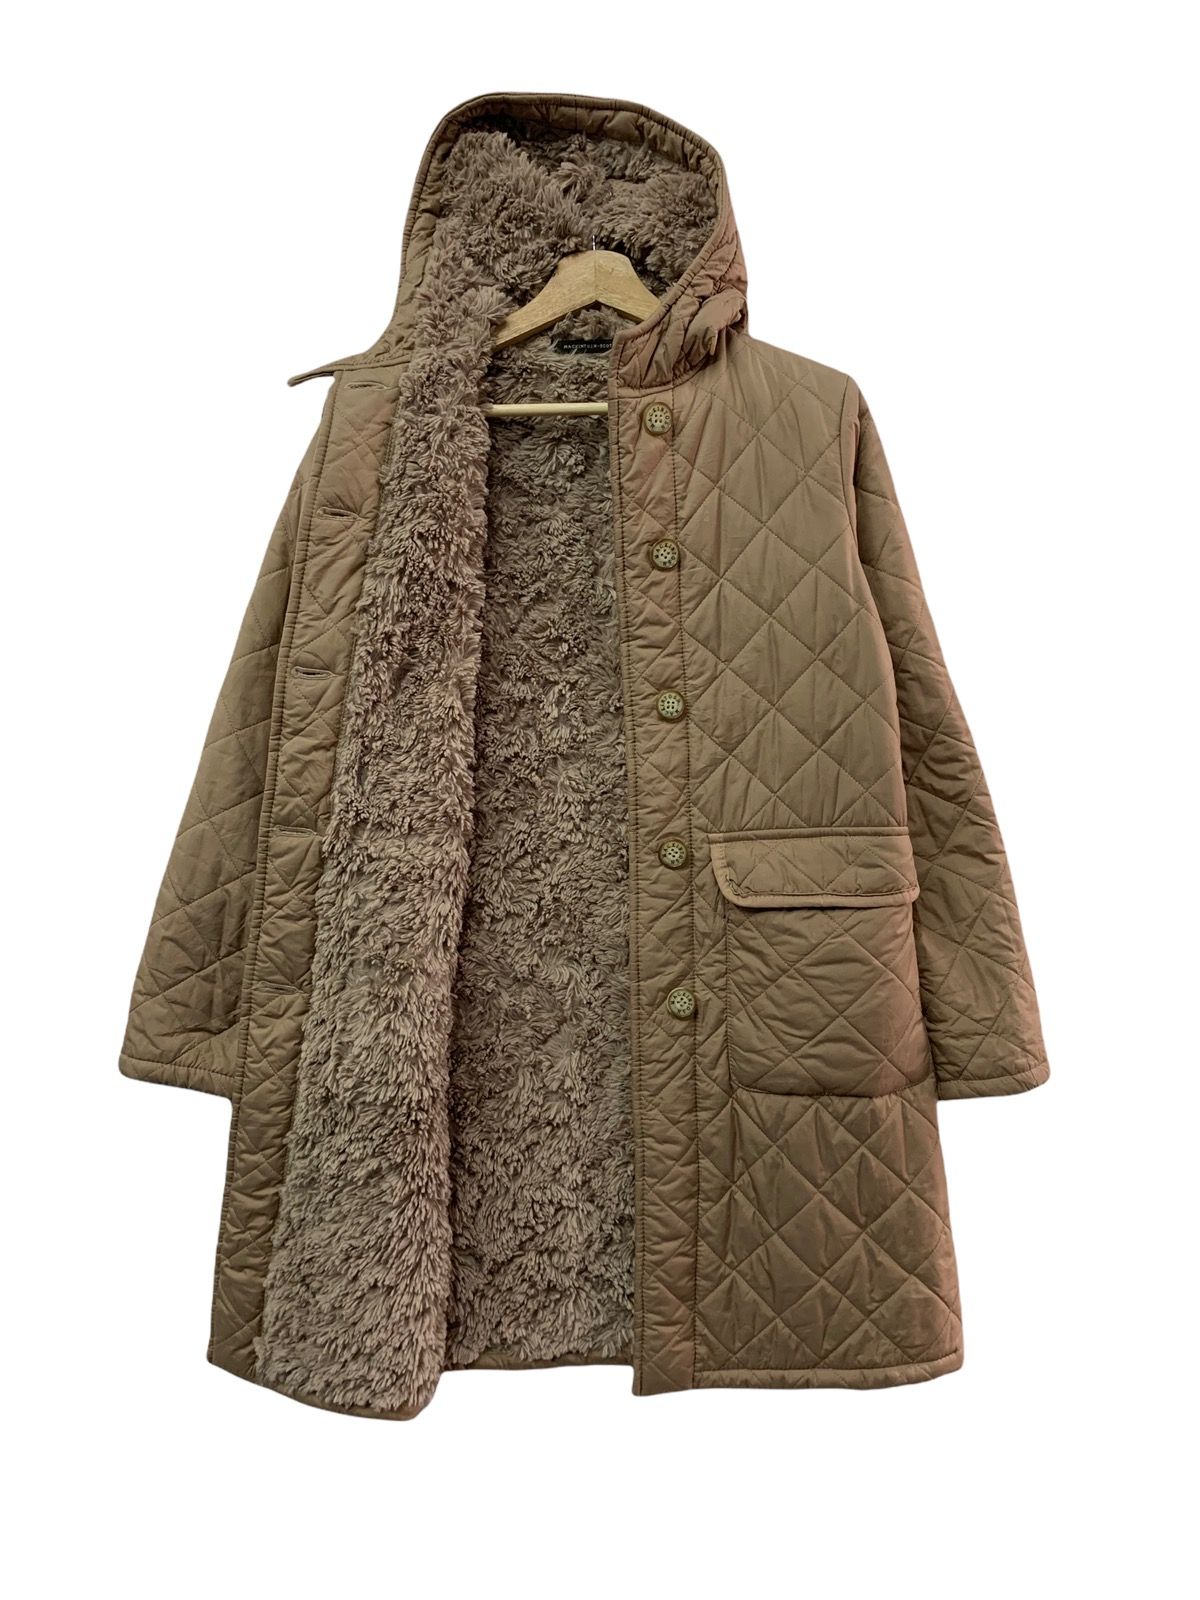 🔥MACKINTOSH SCOTLAND QUILTED FUR LINED LONG JACKETS - 1